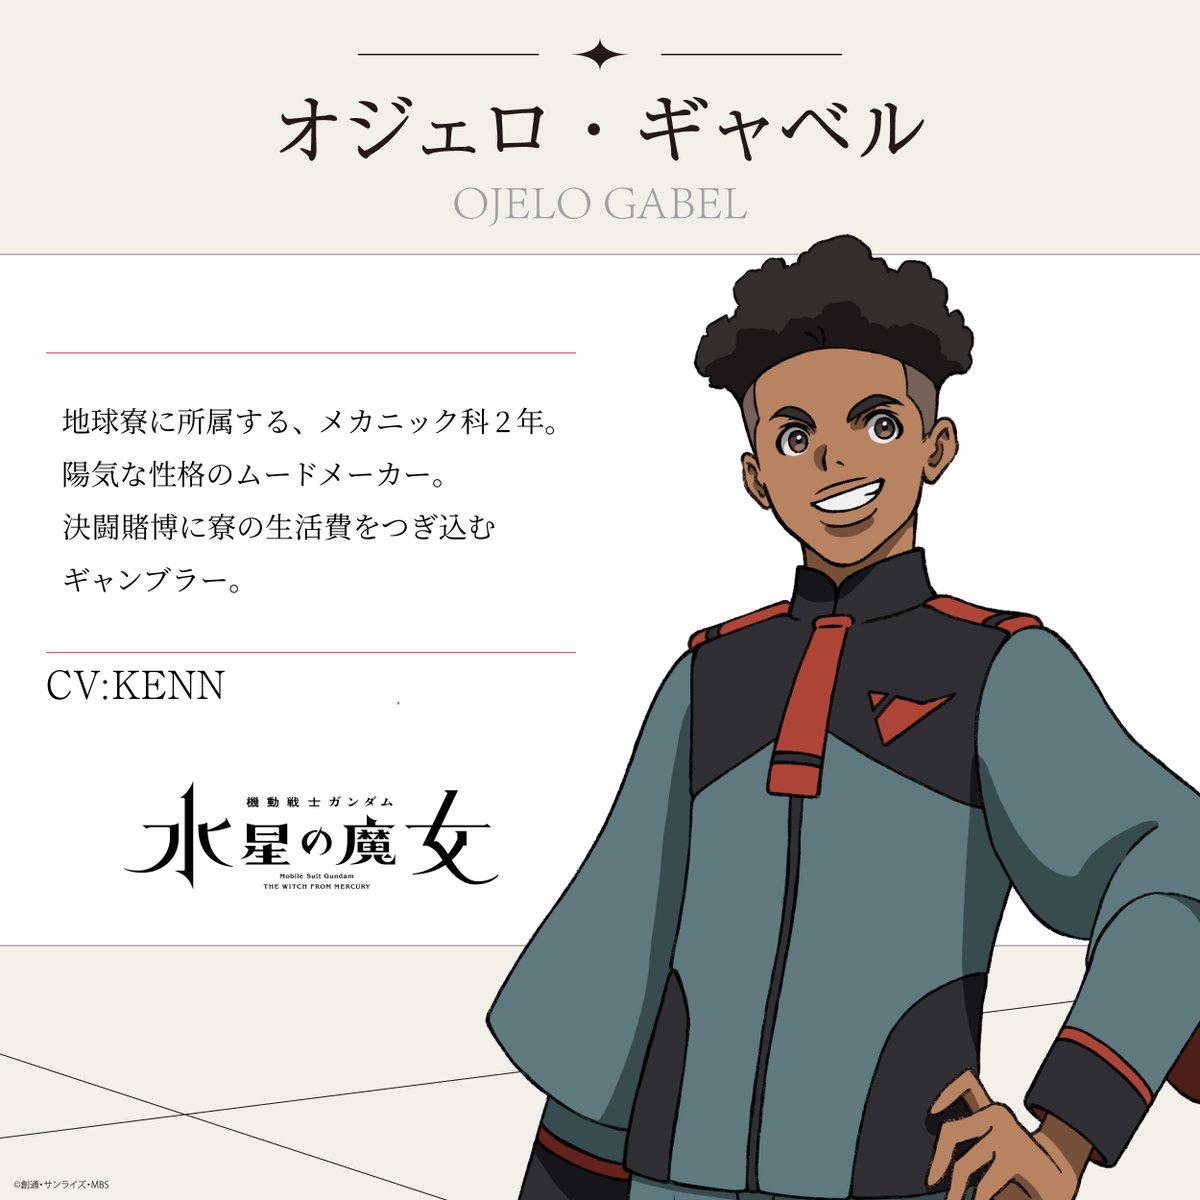 KENN as Ojelo Gabel in Mobile Suit Gundam: The Witch from Mercury